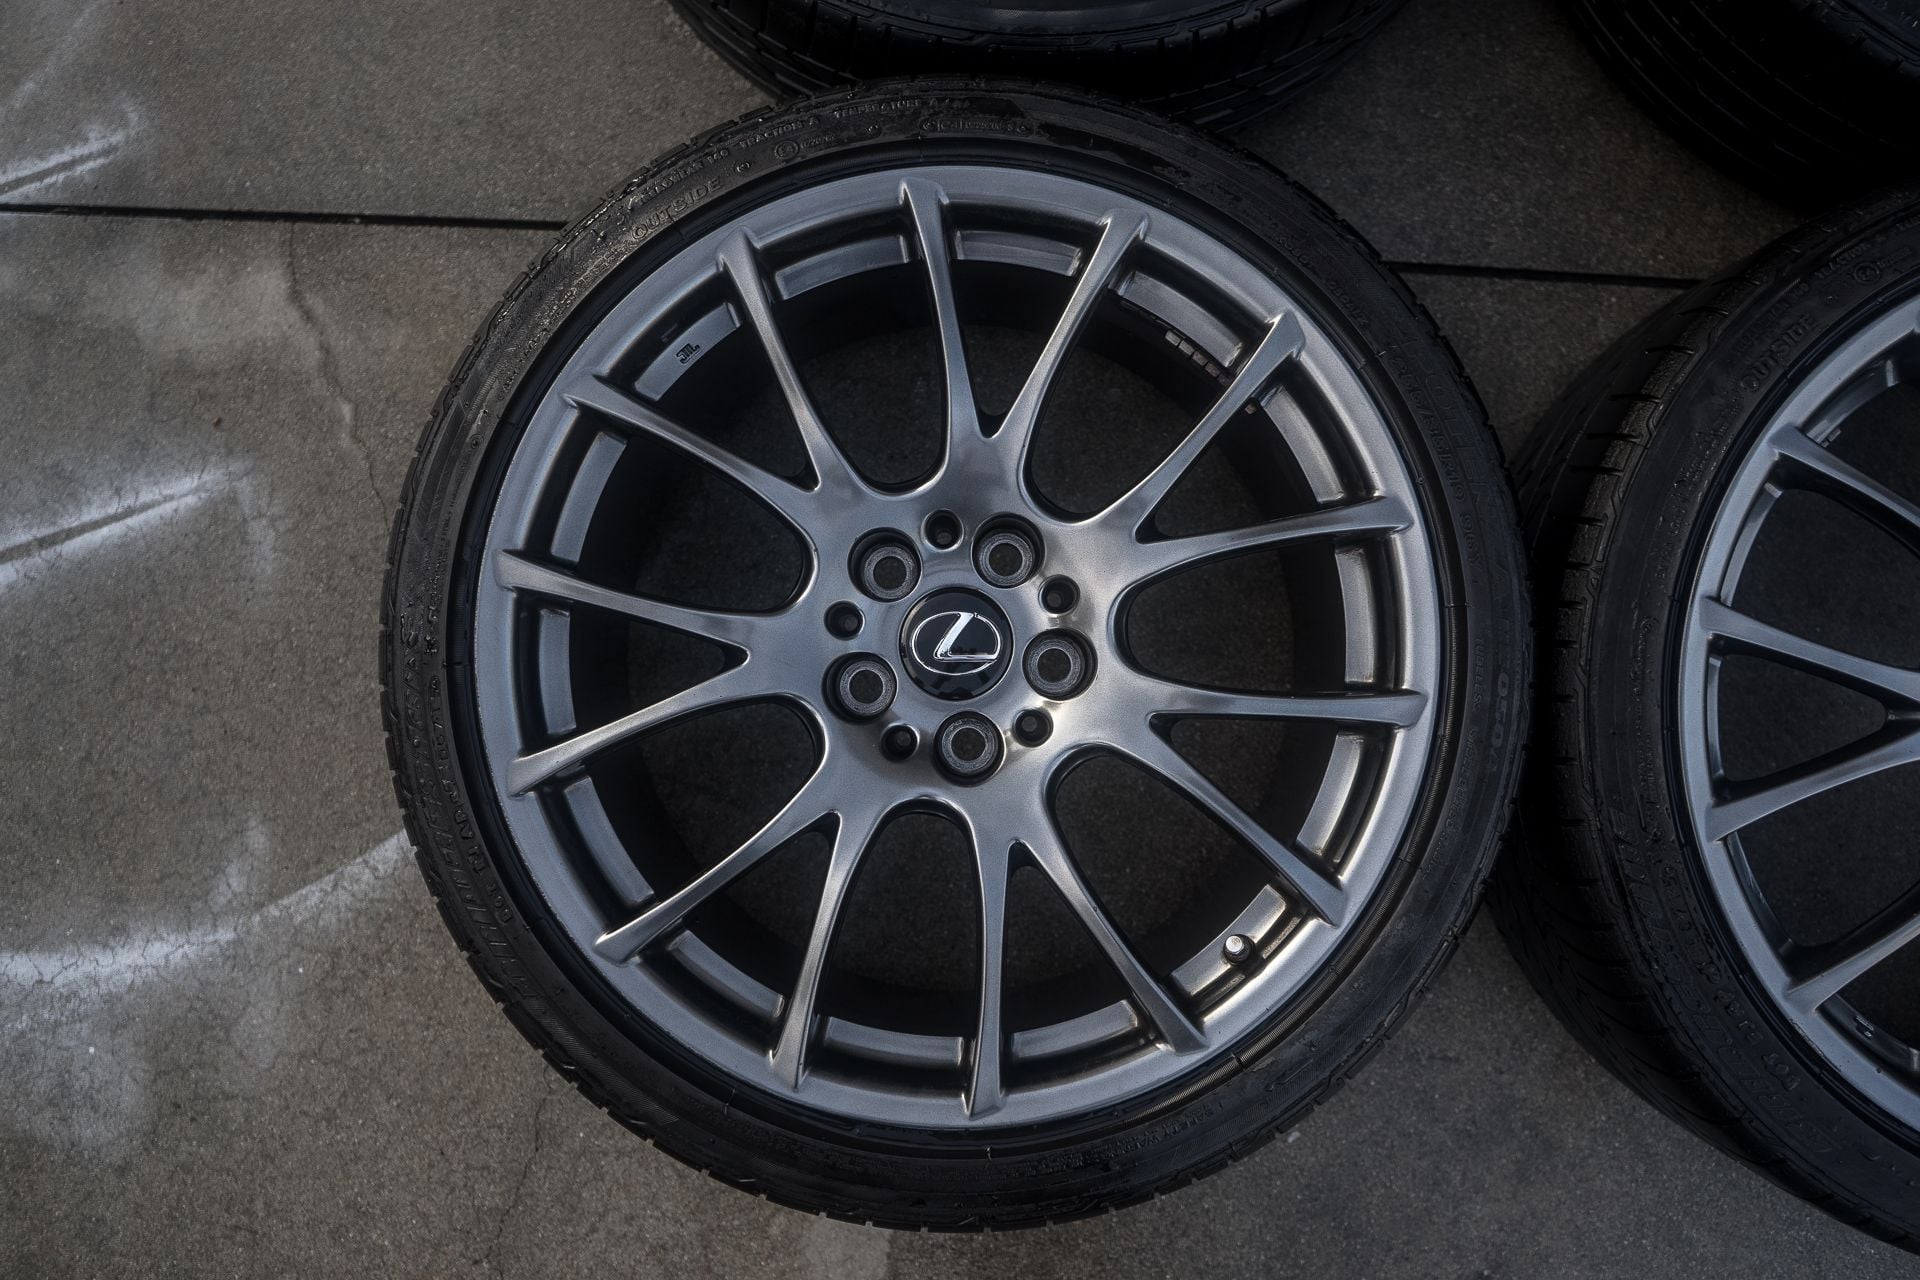 Wheels and Tires/Axles - 2012-2014 OEM BBS IS-F Wheels with Bridgestone Tires and TPMS - Used - 2008 to 2014 Lexus IS F - 2006 to 2019 Lexus IS250 - 2015 to 2019 Lexus IS200t - 2006 to 2019 Lexus IS350 - 2013 to 2019 Lexus GS350 - 2015 to 2019 Lexus RC F - 2015 to 2019 Lexus GS F - 2015 to 2019 Lexus GS200t - Laguna Niguel, CA 92677, United States